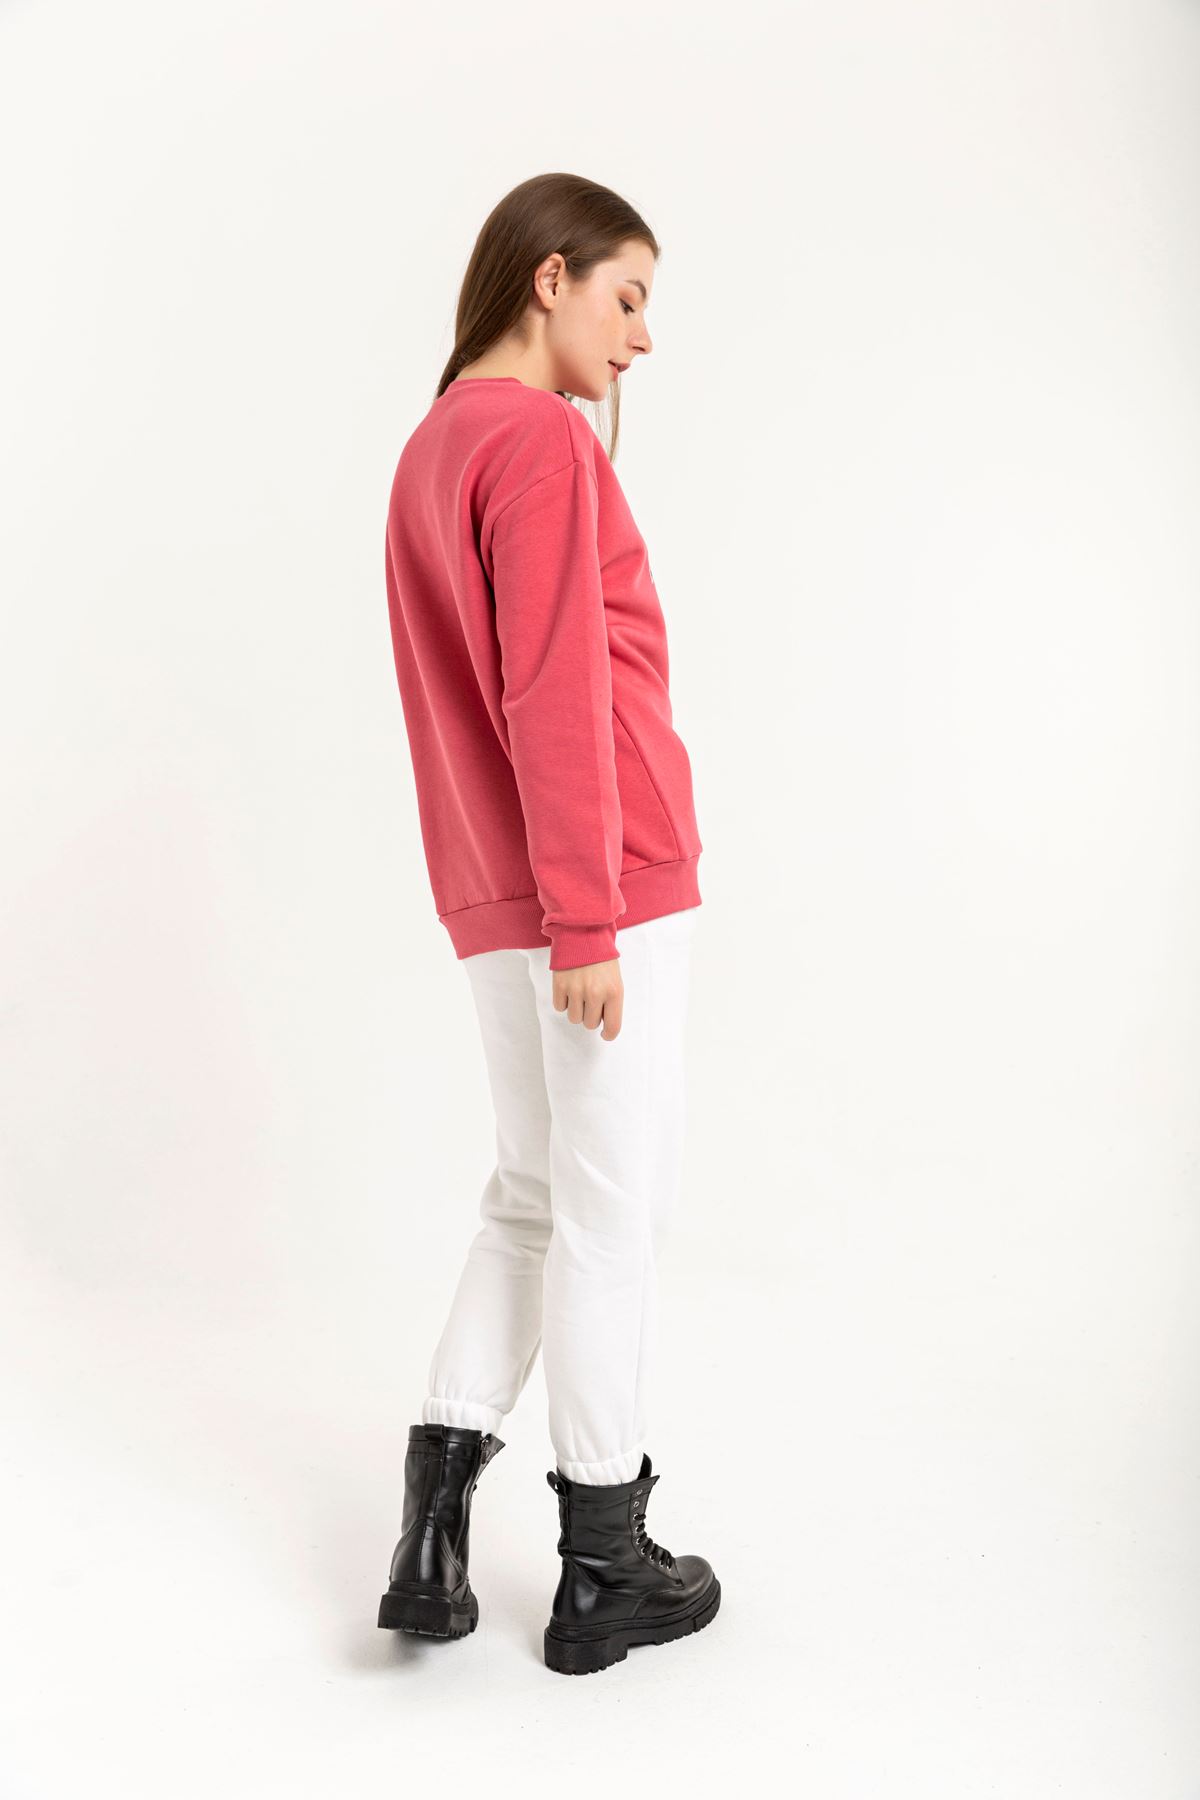 Third Knit With Wool İnside Fabric Long Sleeve Hip Height Inscribed Women Sweatshirt - Pink